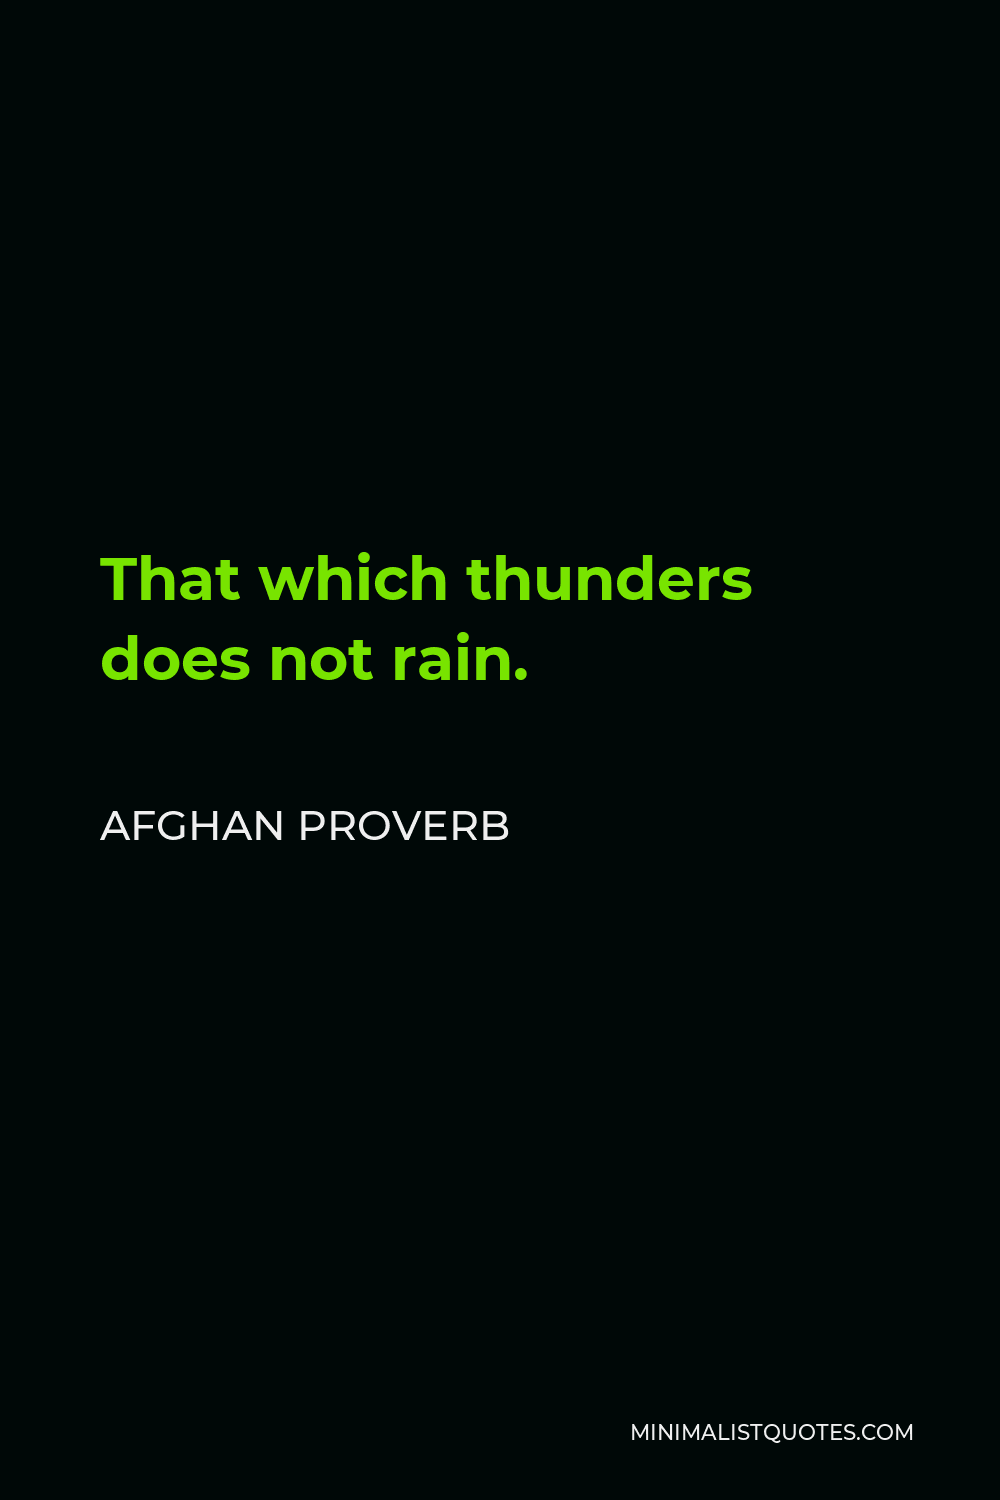 Afghan Proverb Quote - That which thunders does not rain.